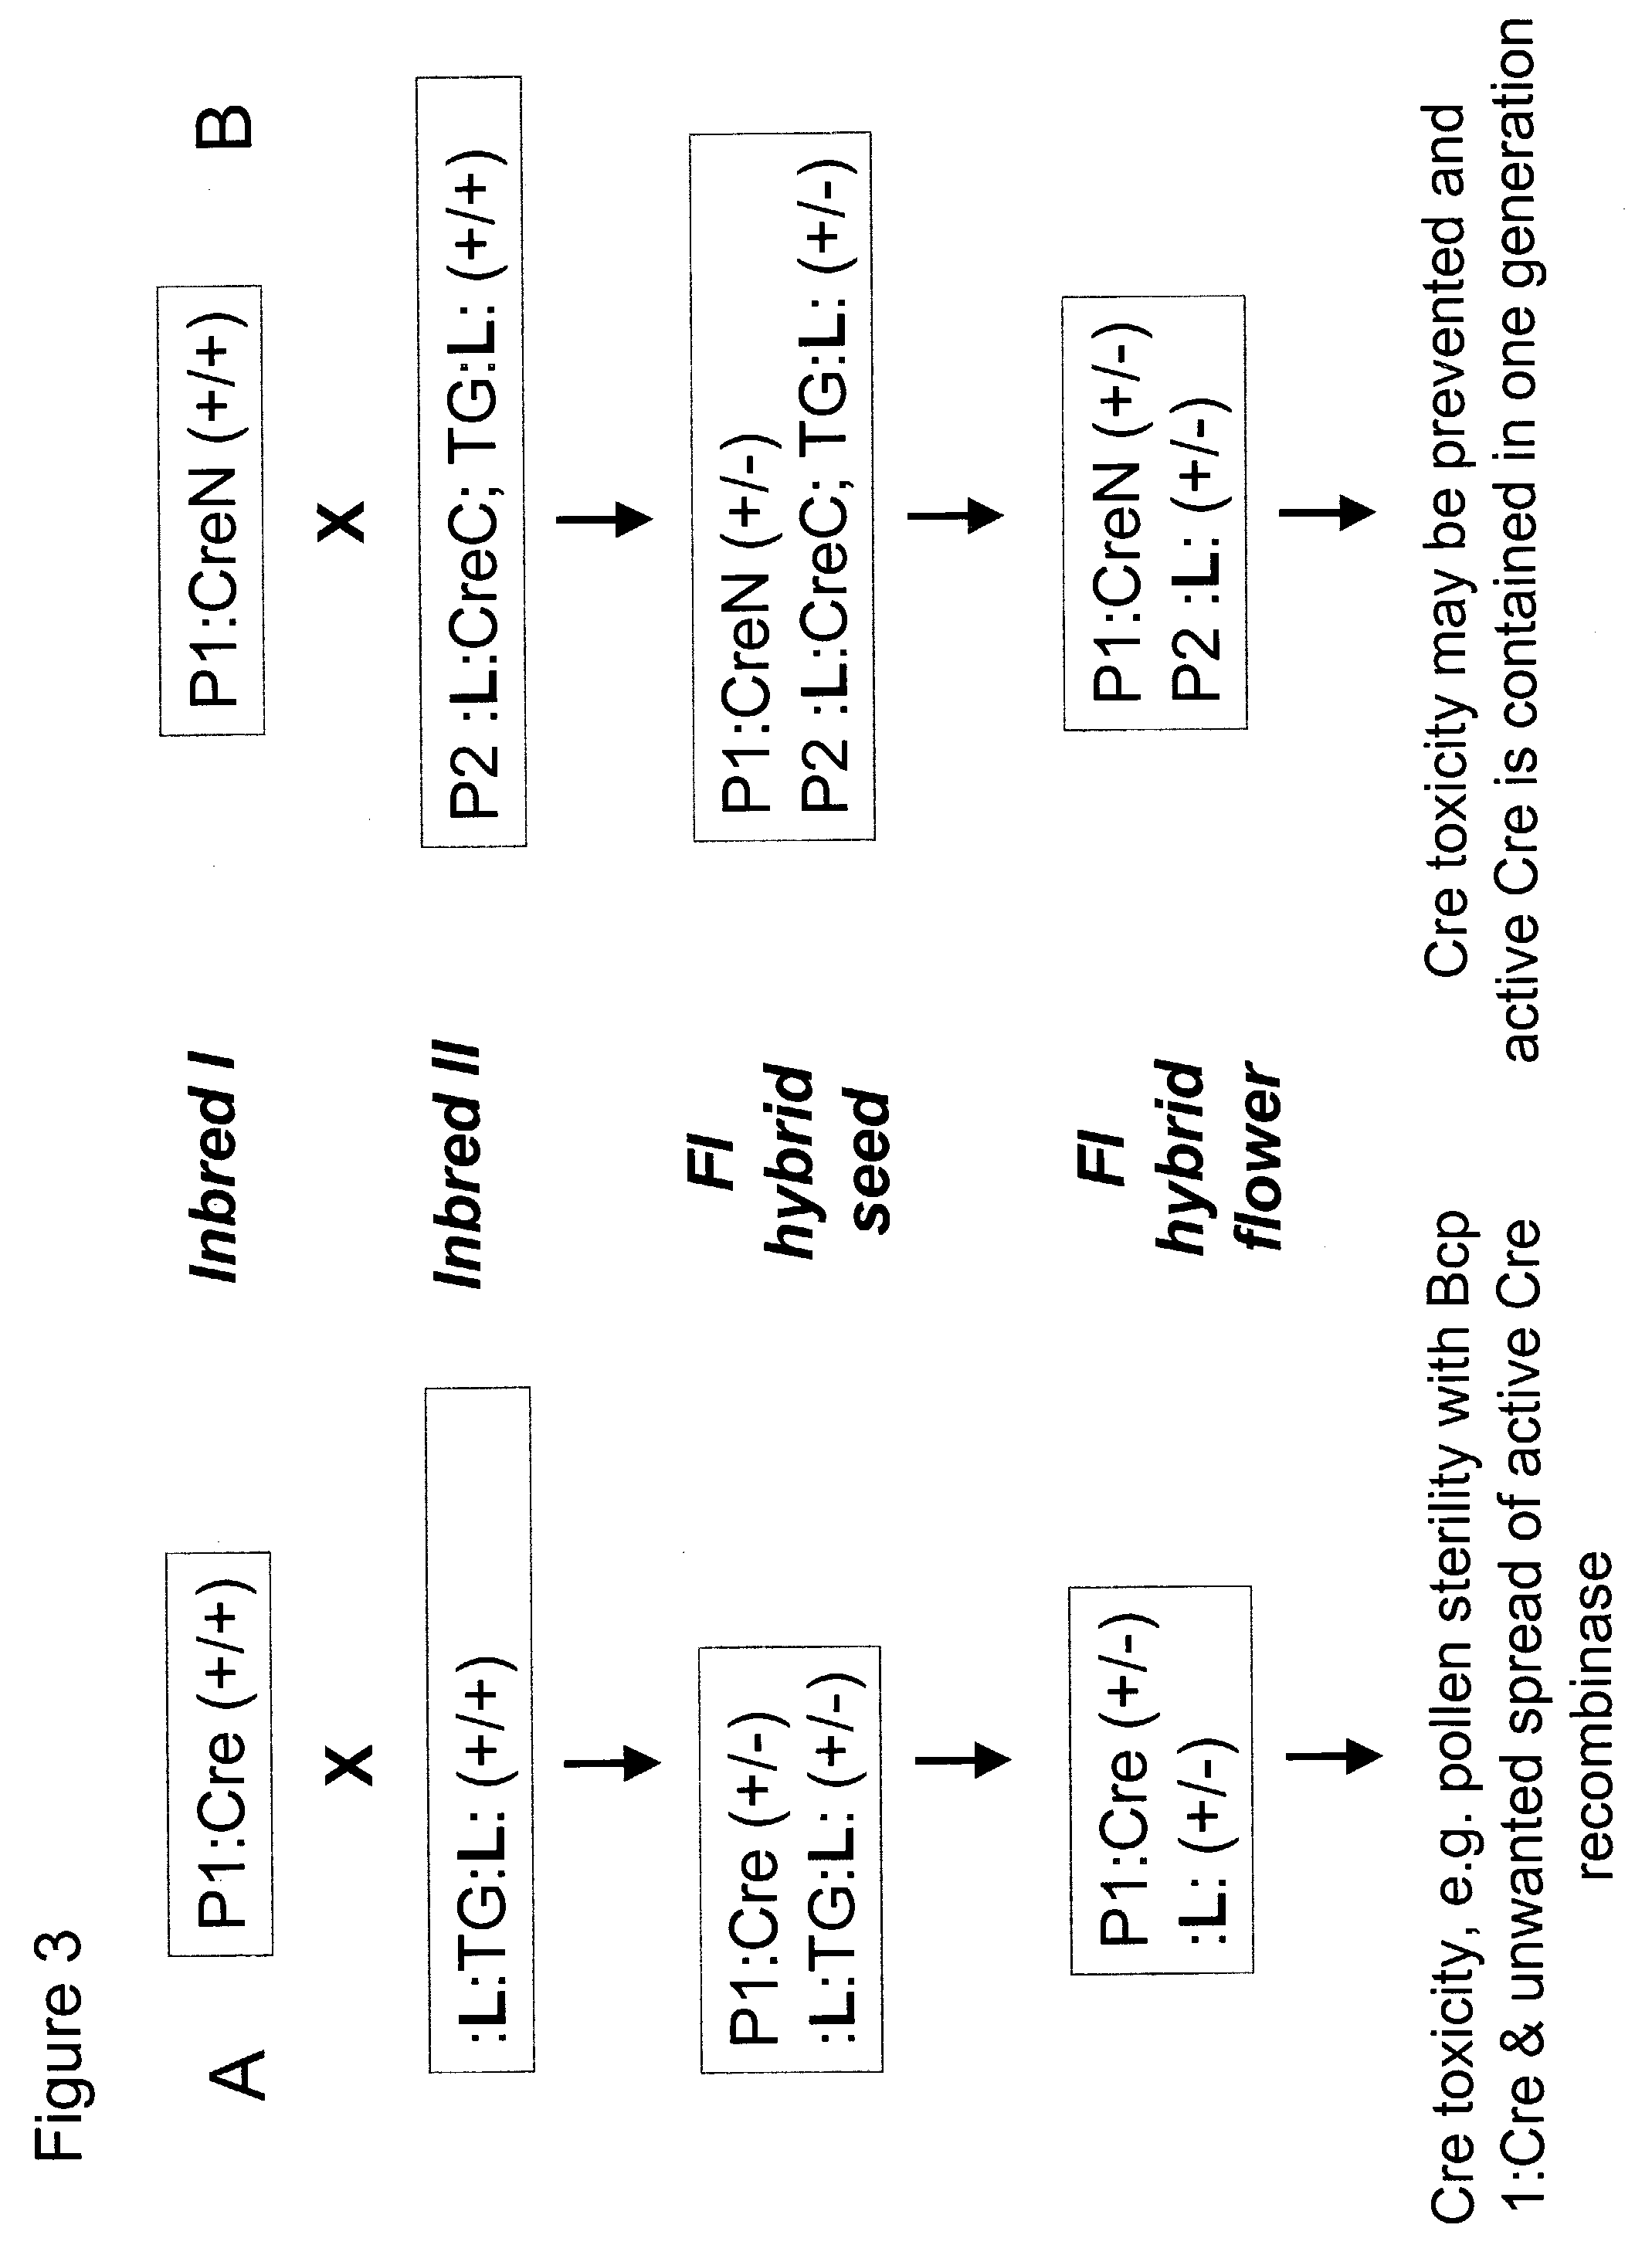 Method of controlling site-specific recombination